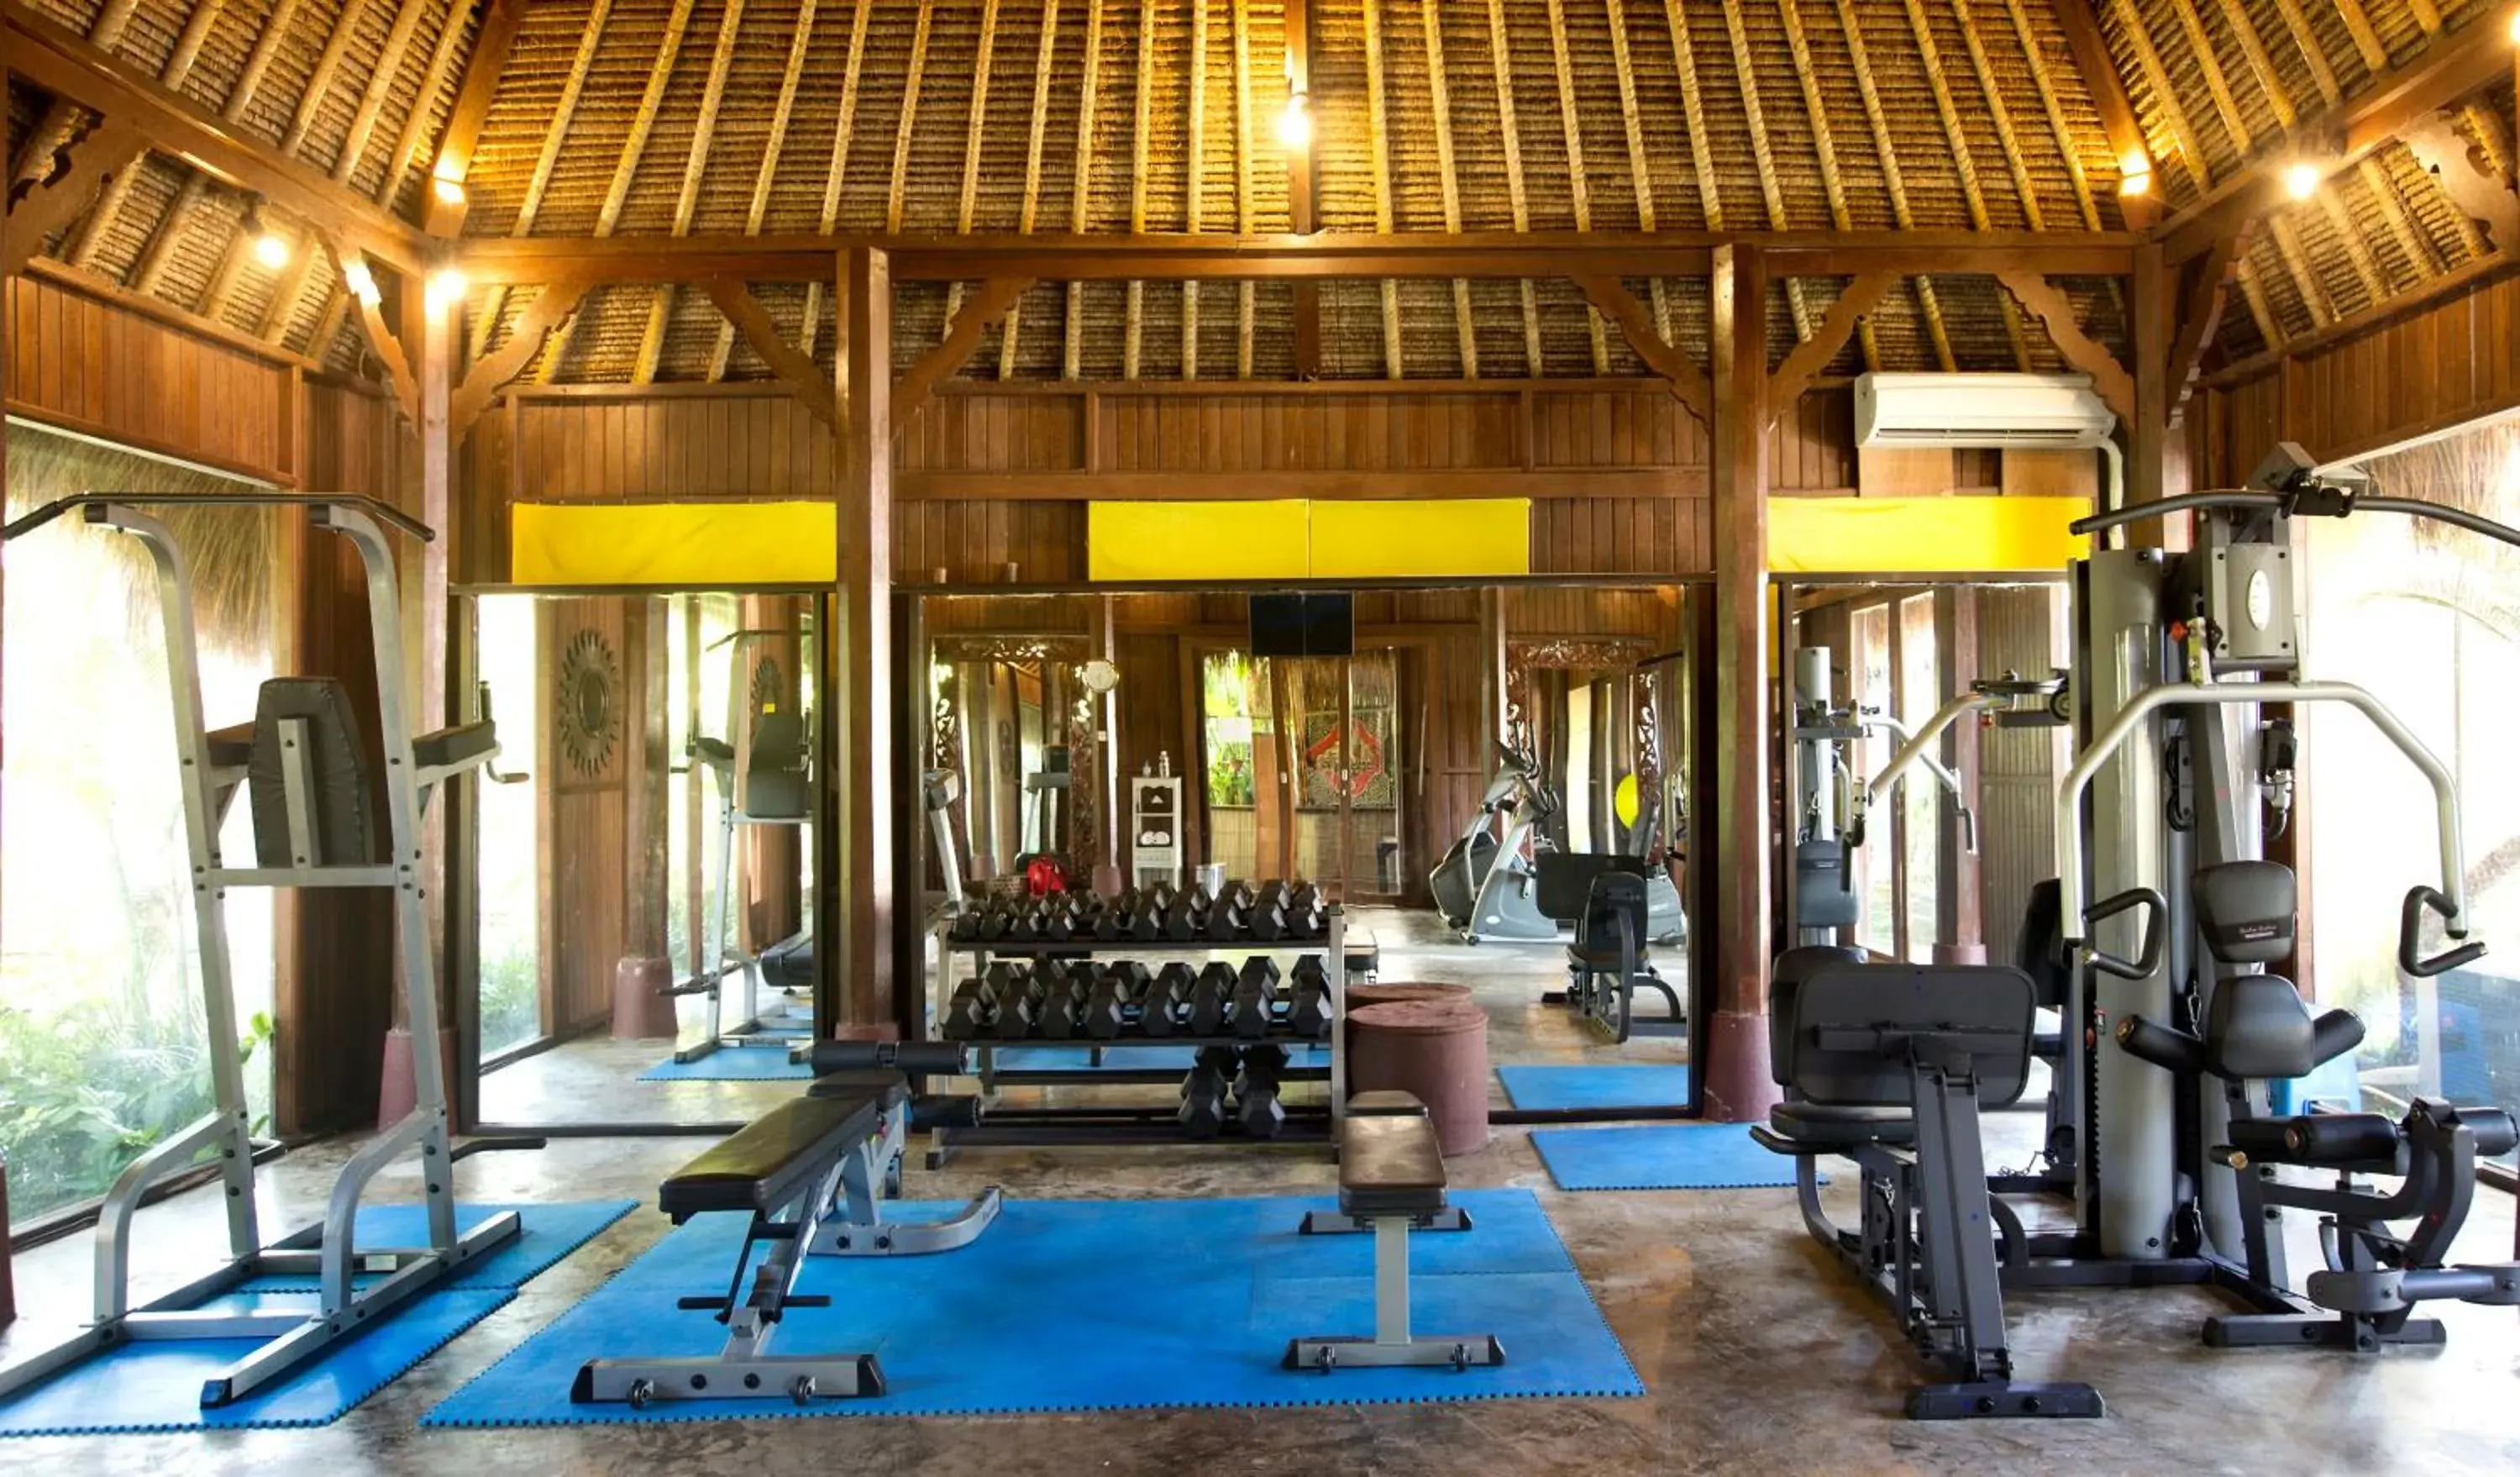 Fitness centre/facilities in The Mansion Resort Hotel & Spa